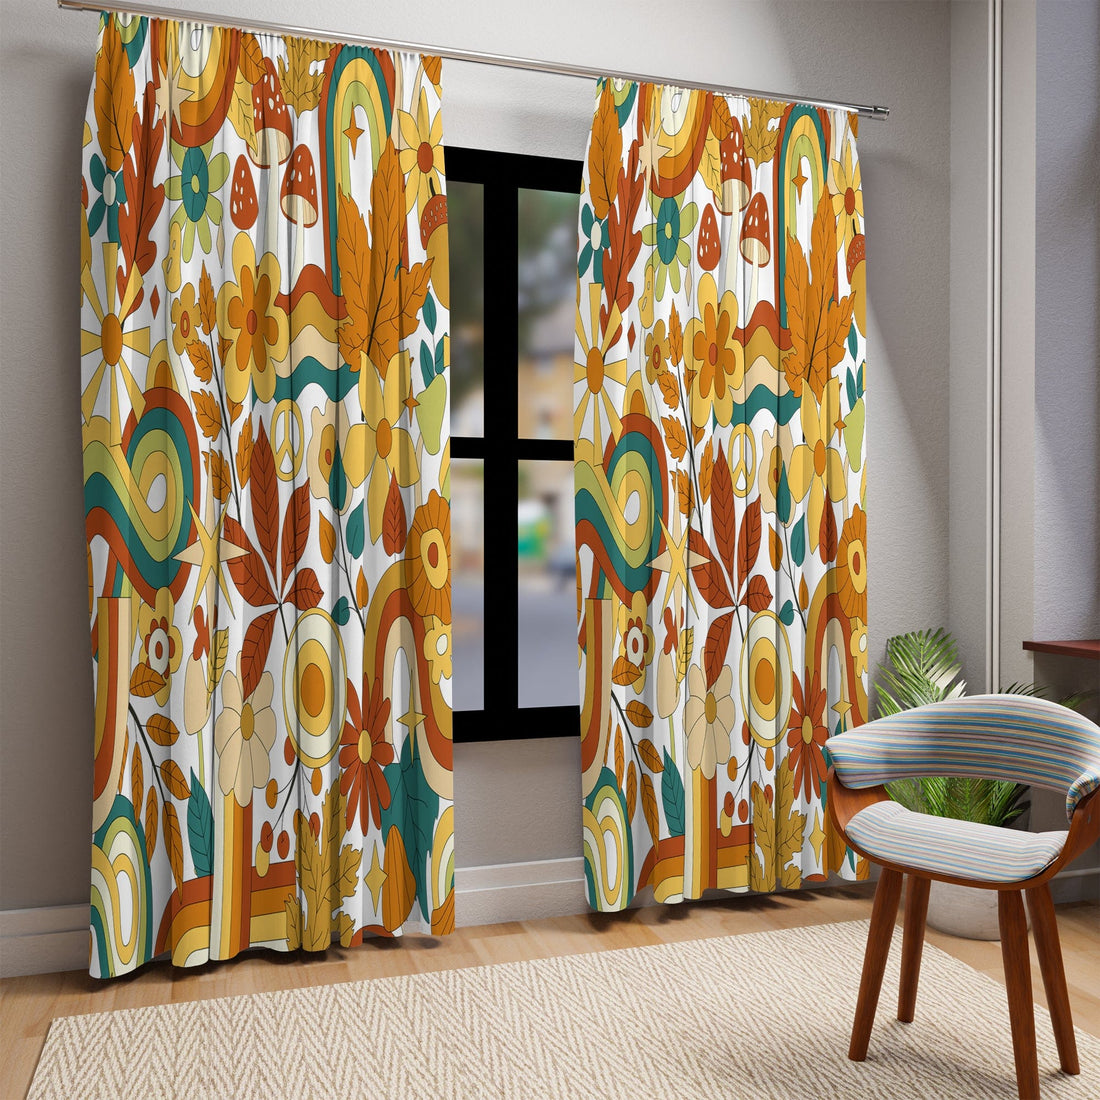 Kate McEnroe New York Window Curtains in 70s Groovy Hippie Retro Floral PrintWindow CurtainsCurtainSheer - 50x84 - DoublePanel - 20220801014903449